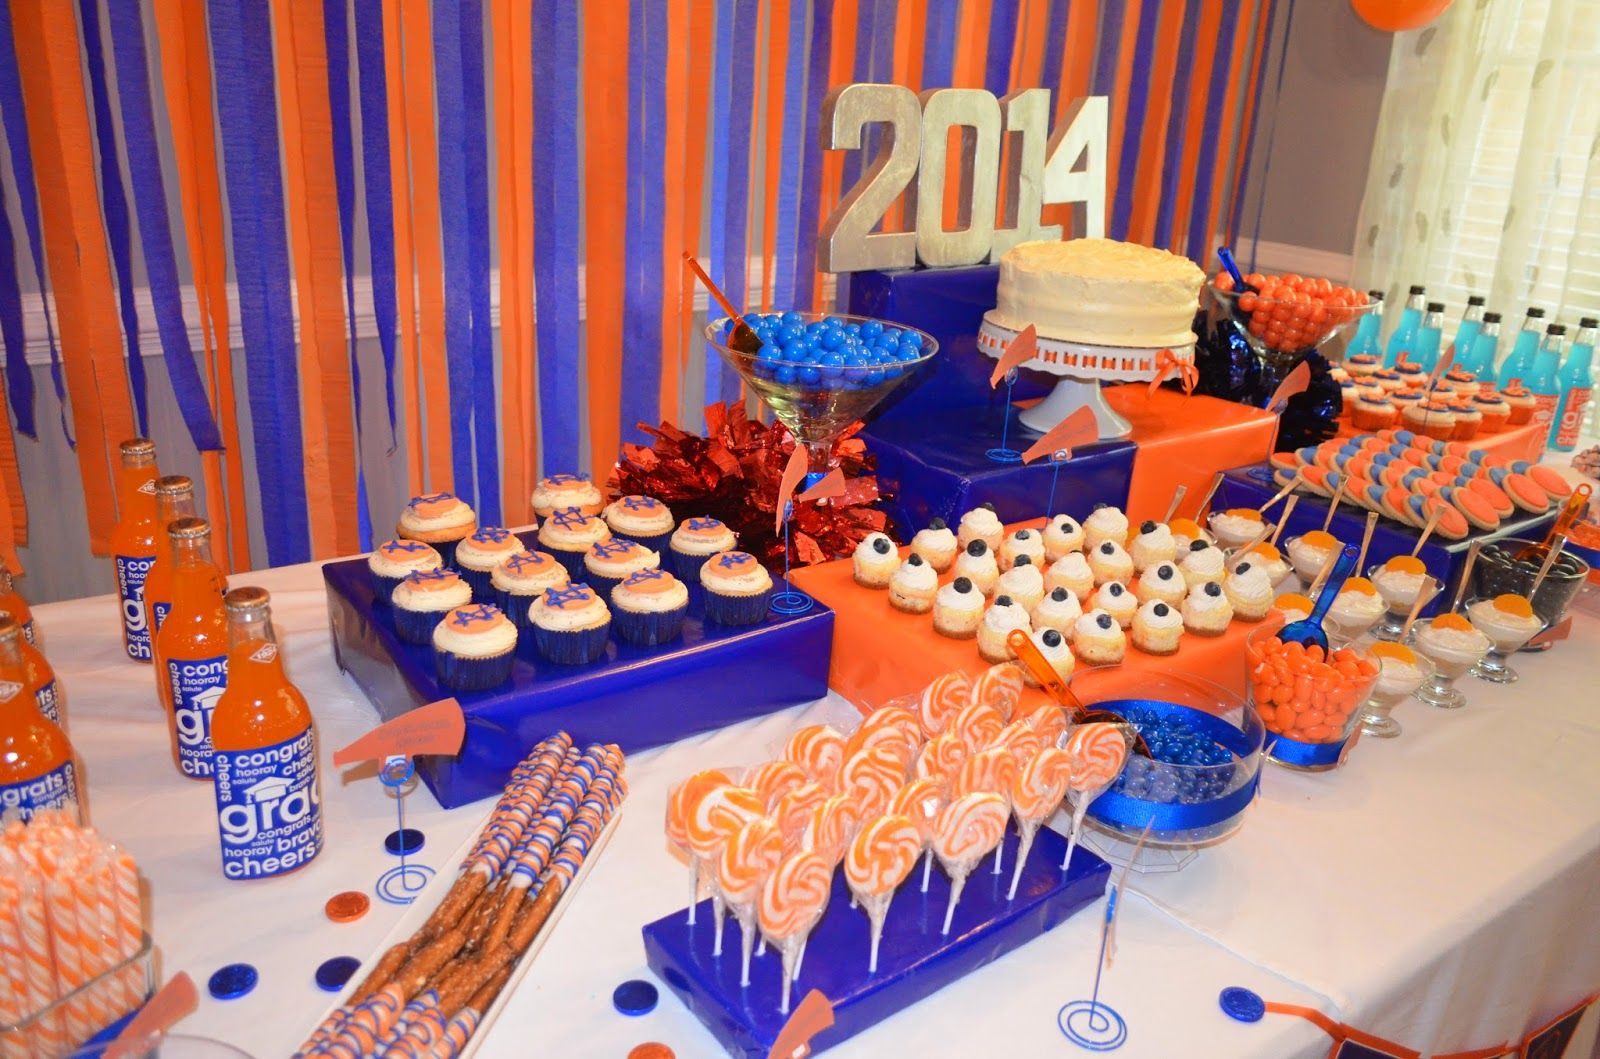 Red And Blue Graduation Party Ideas
 Cakegirl s Kitchen Blue and Orange Graduation Party